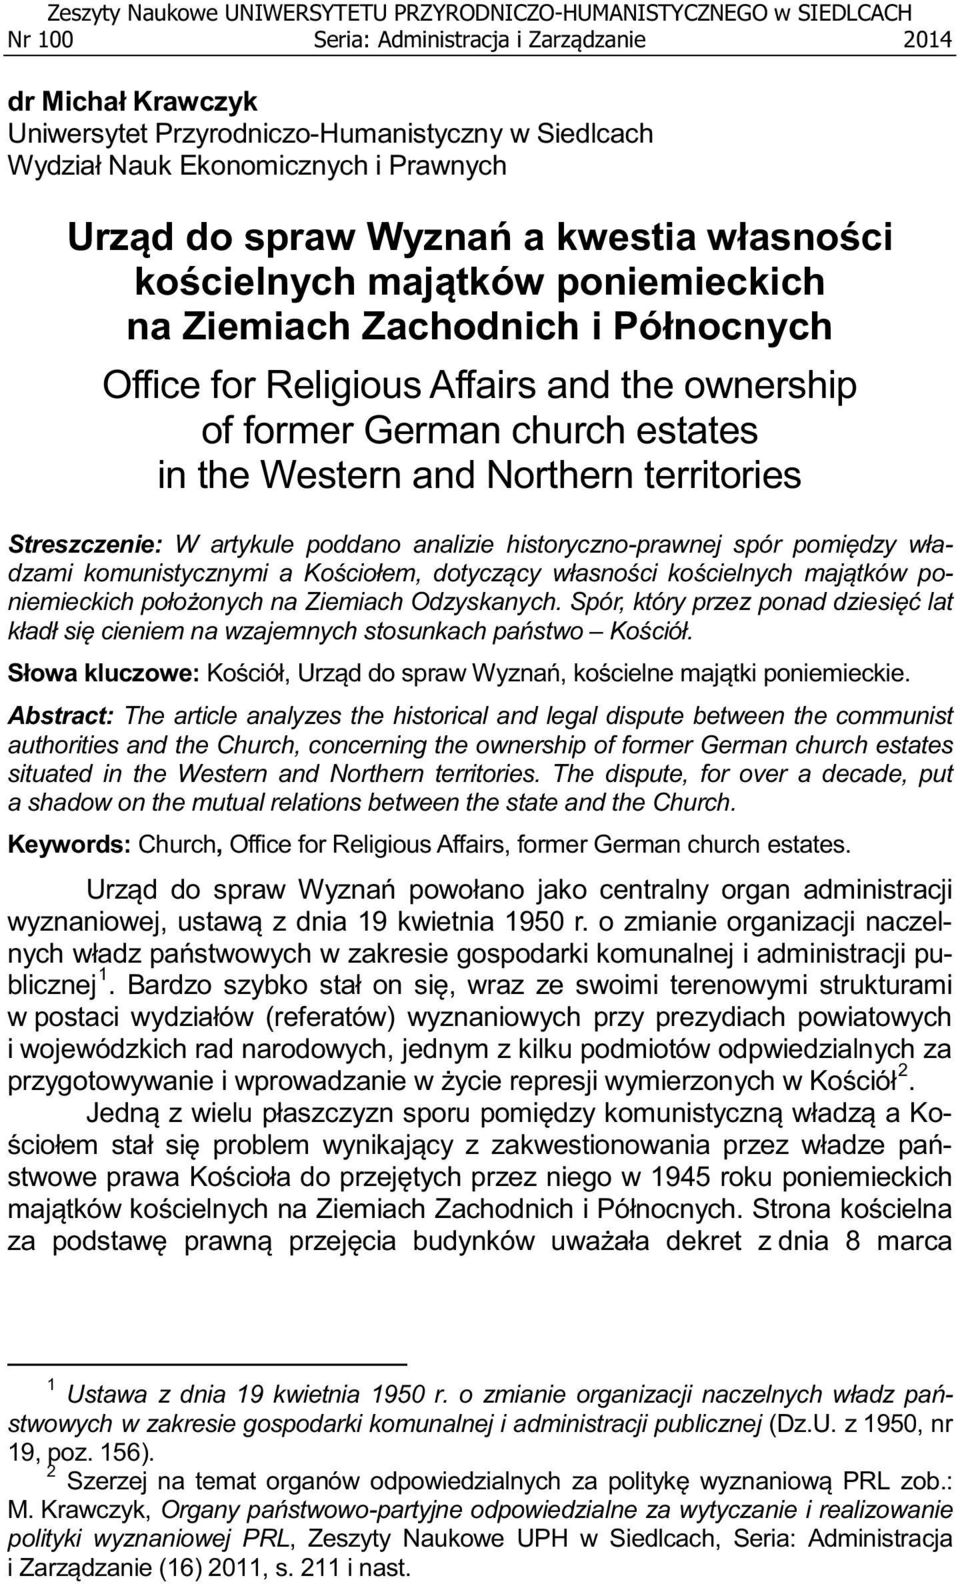 dispute between the communist authorities and the Church, concerning the ownership of former German church estates situated in the Western and Northern territories.